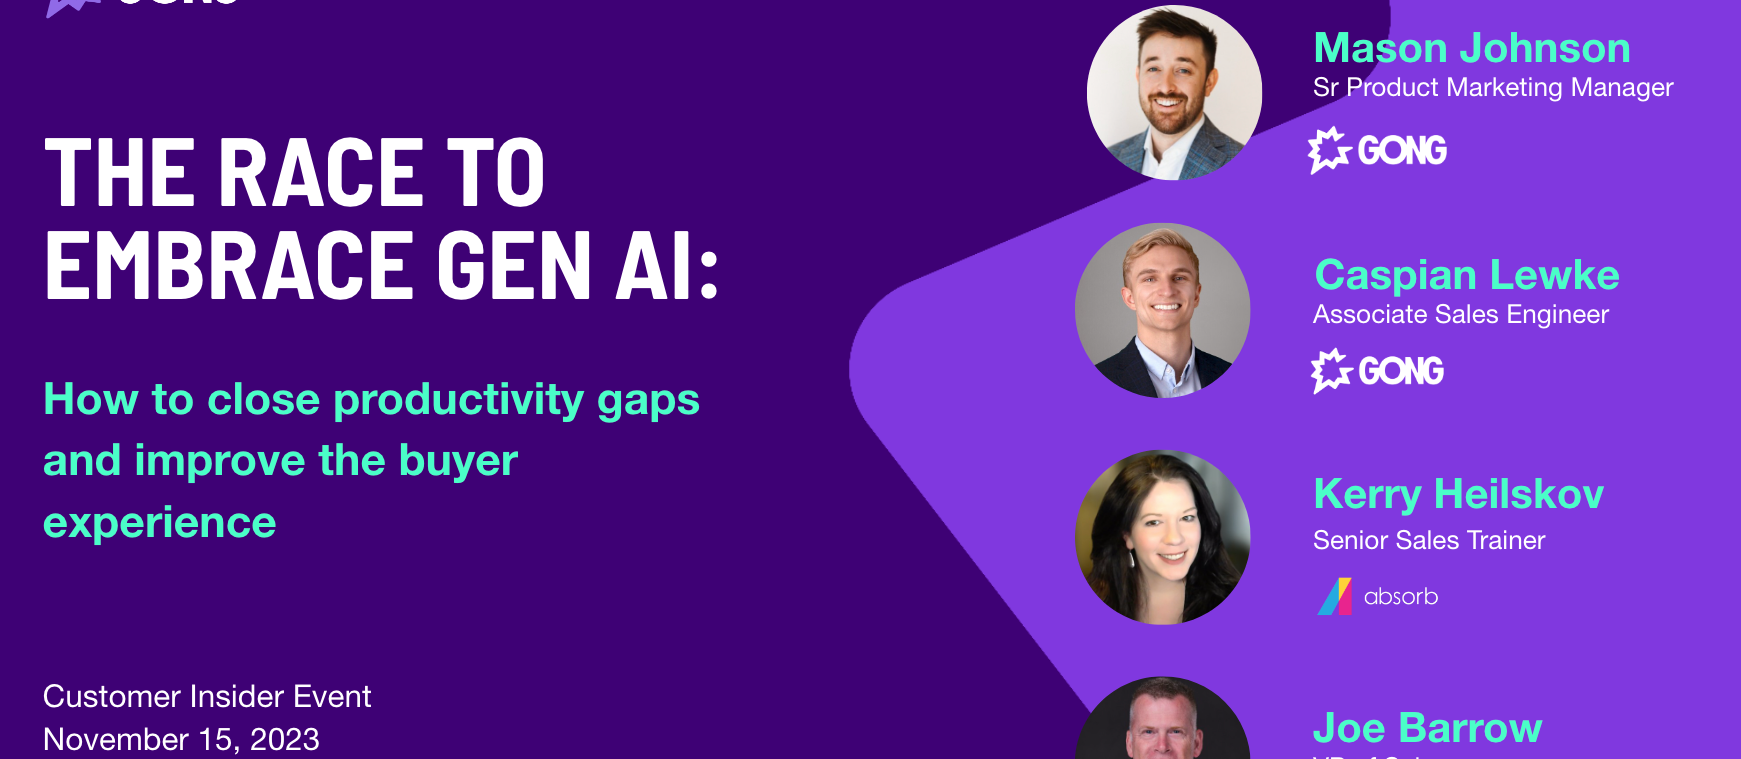 Tips from "Race to Embrace Gen AI: How to close productivity gaps and improve the buyer experience"